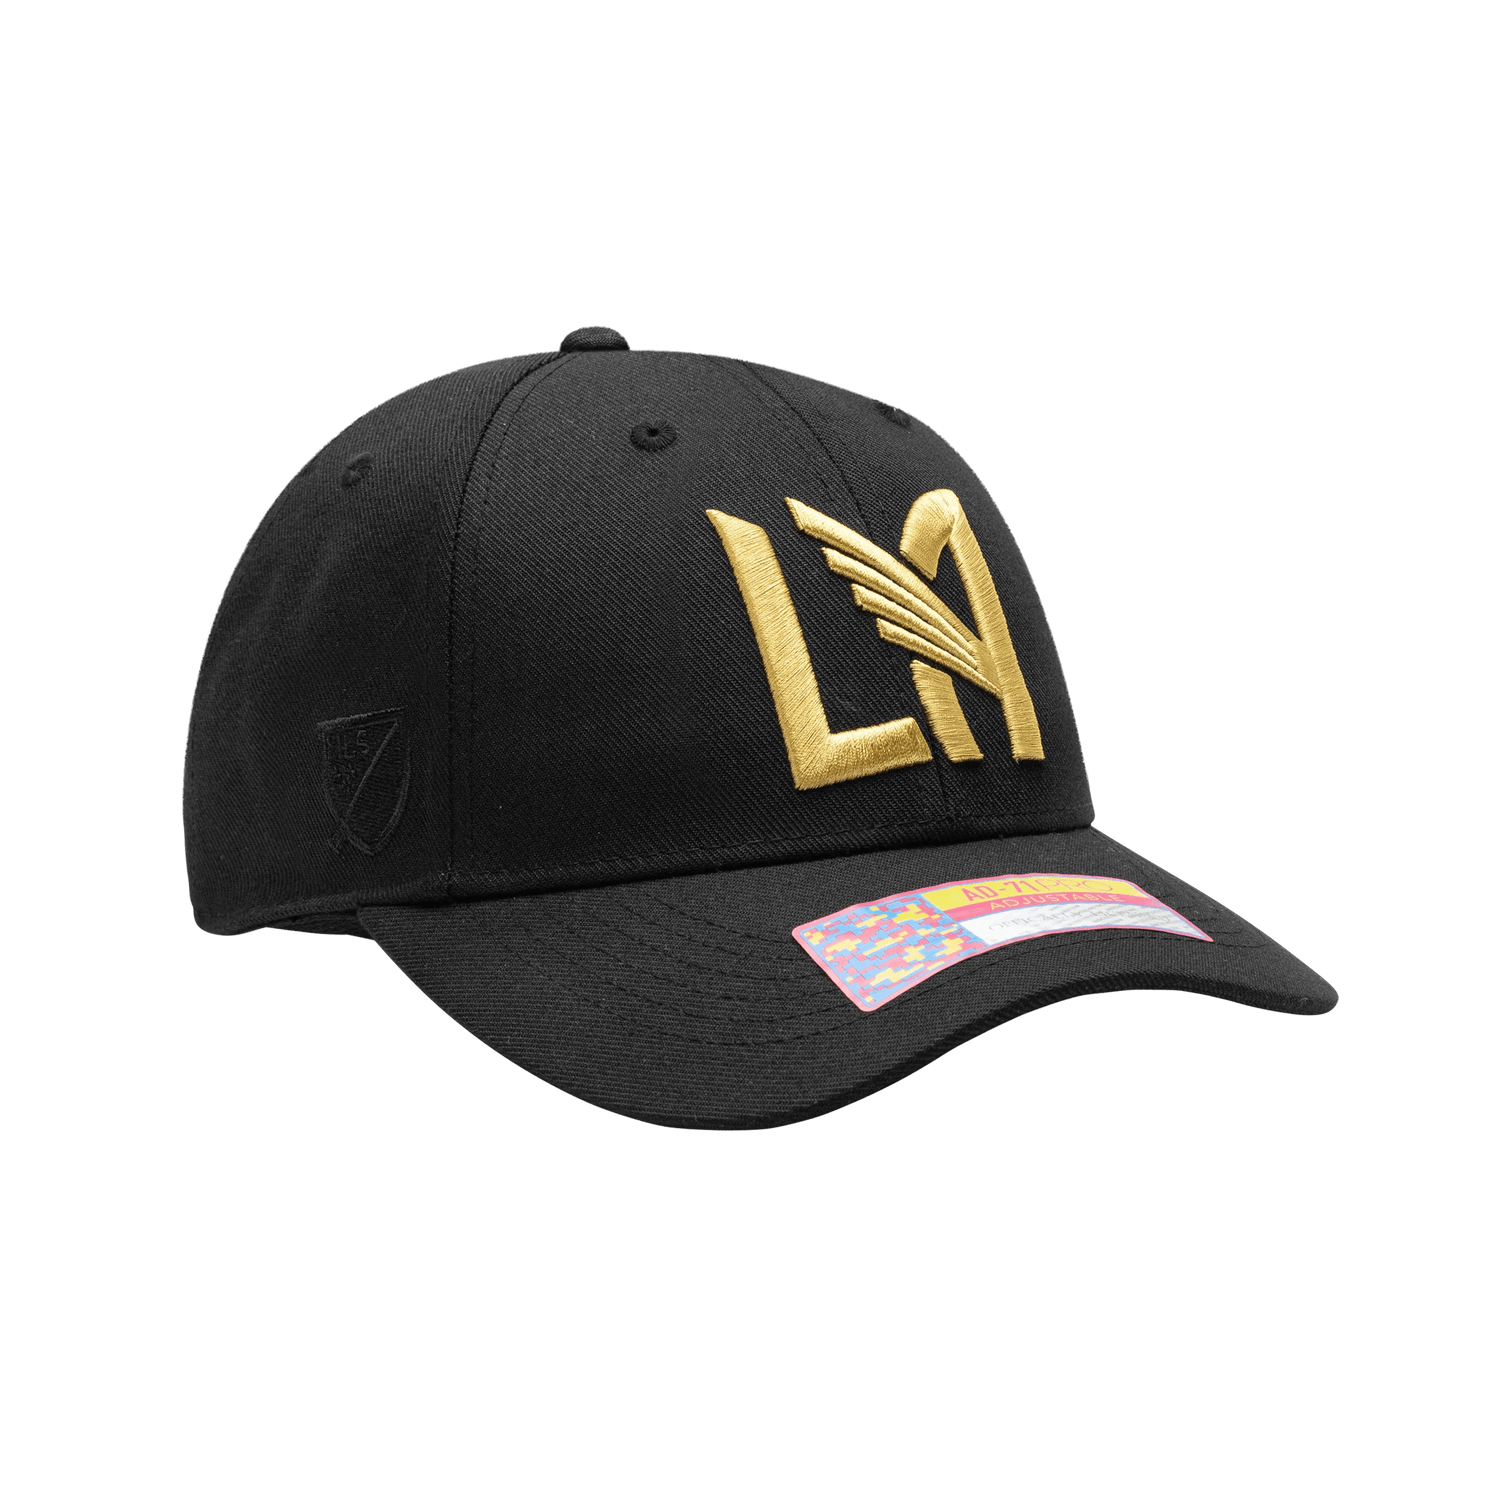 FI Collection LAFC Standard Adjustable Cap (Lateral - Side 2)